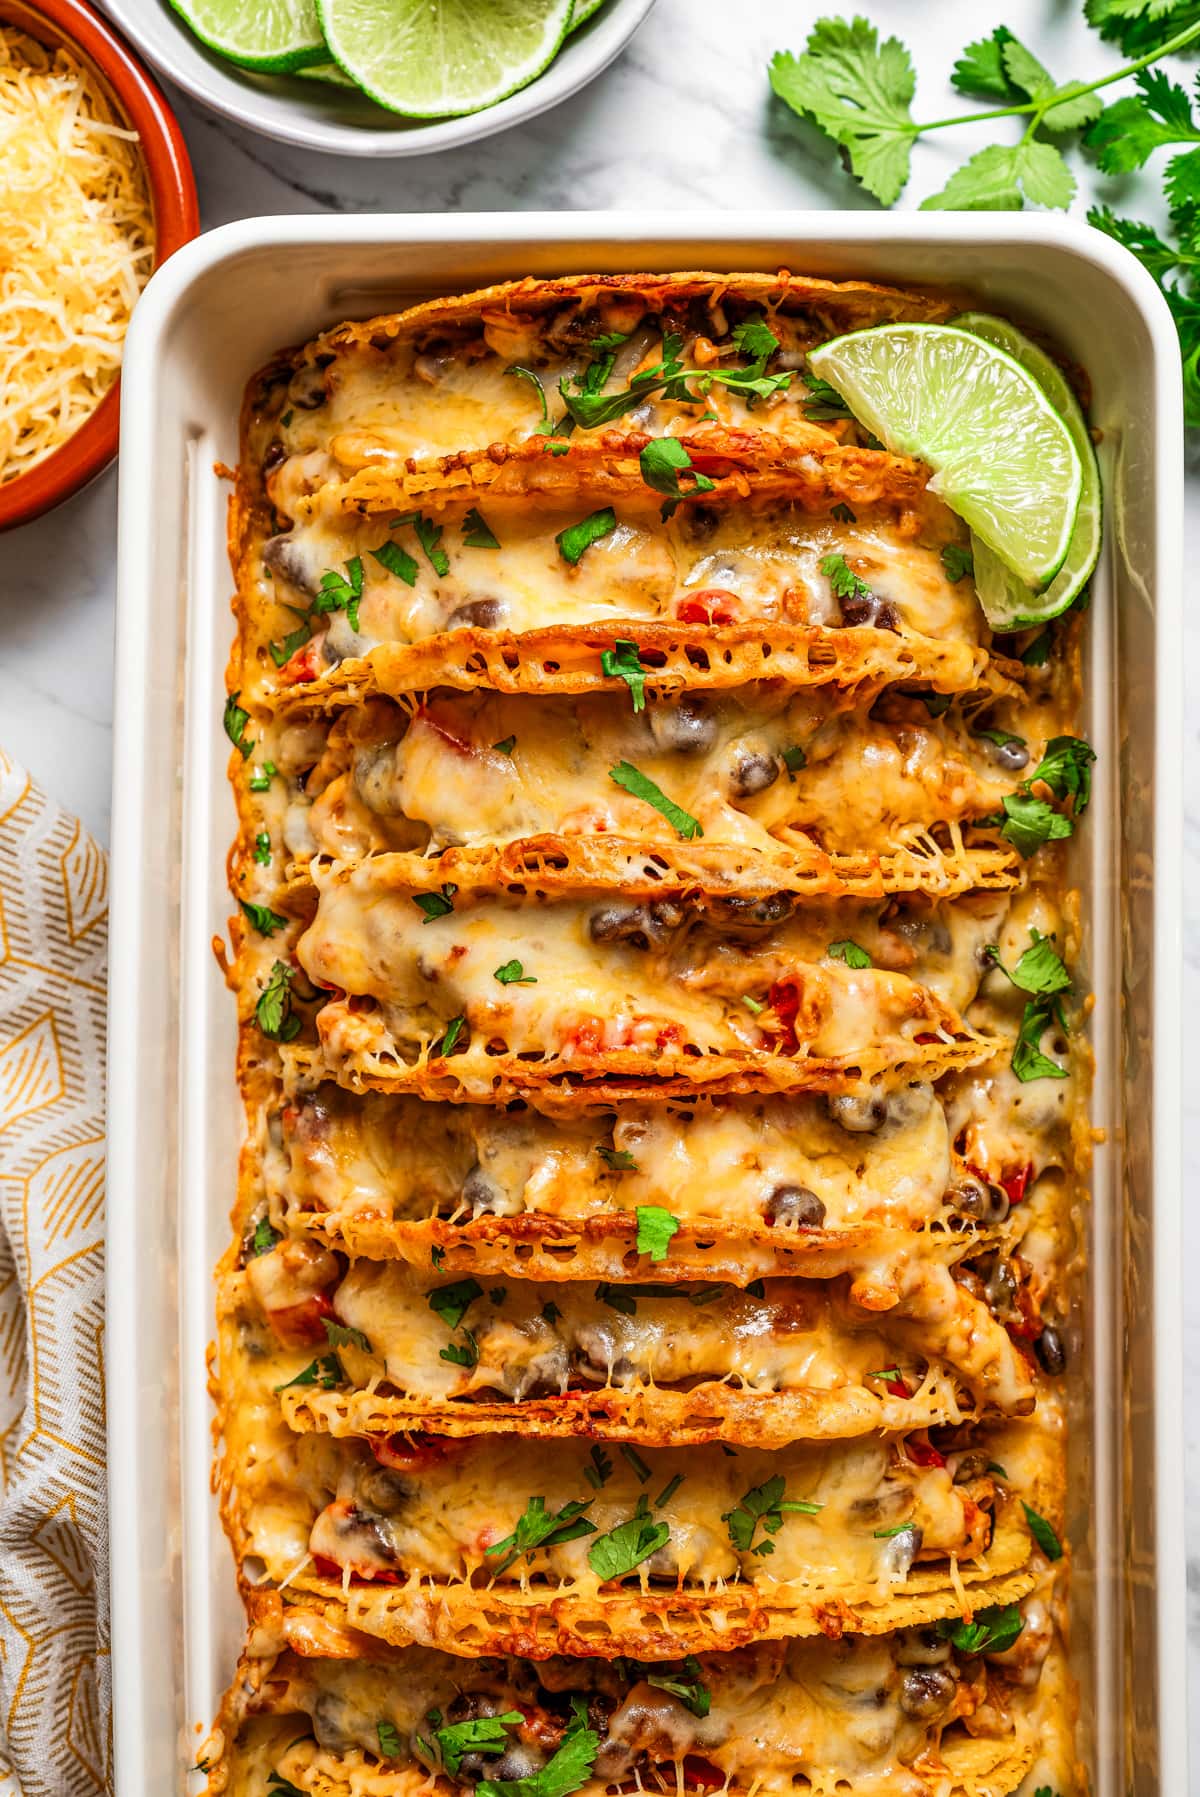 Overhead image of baked chicken tacos in a baking dish, and they are garnished with fresh cilantro and lime slices.